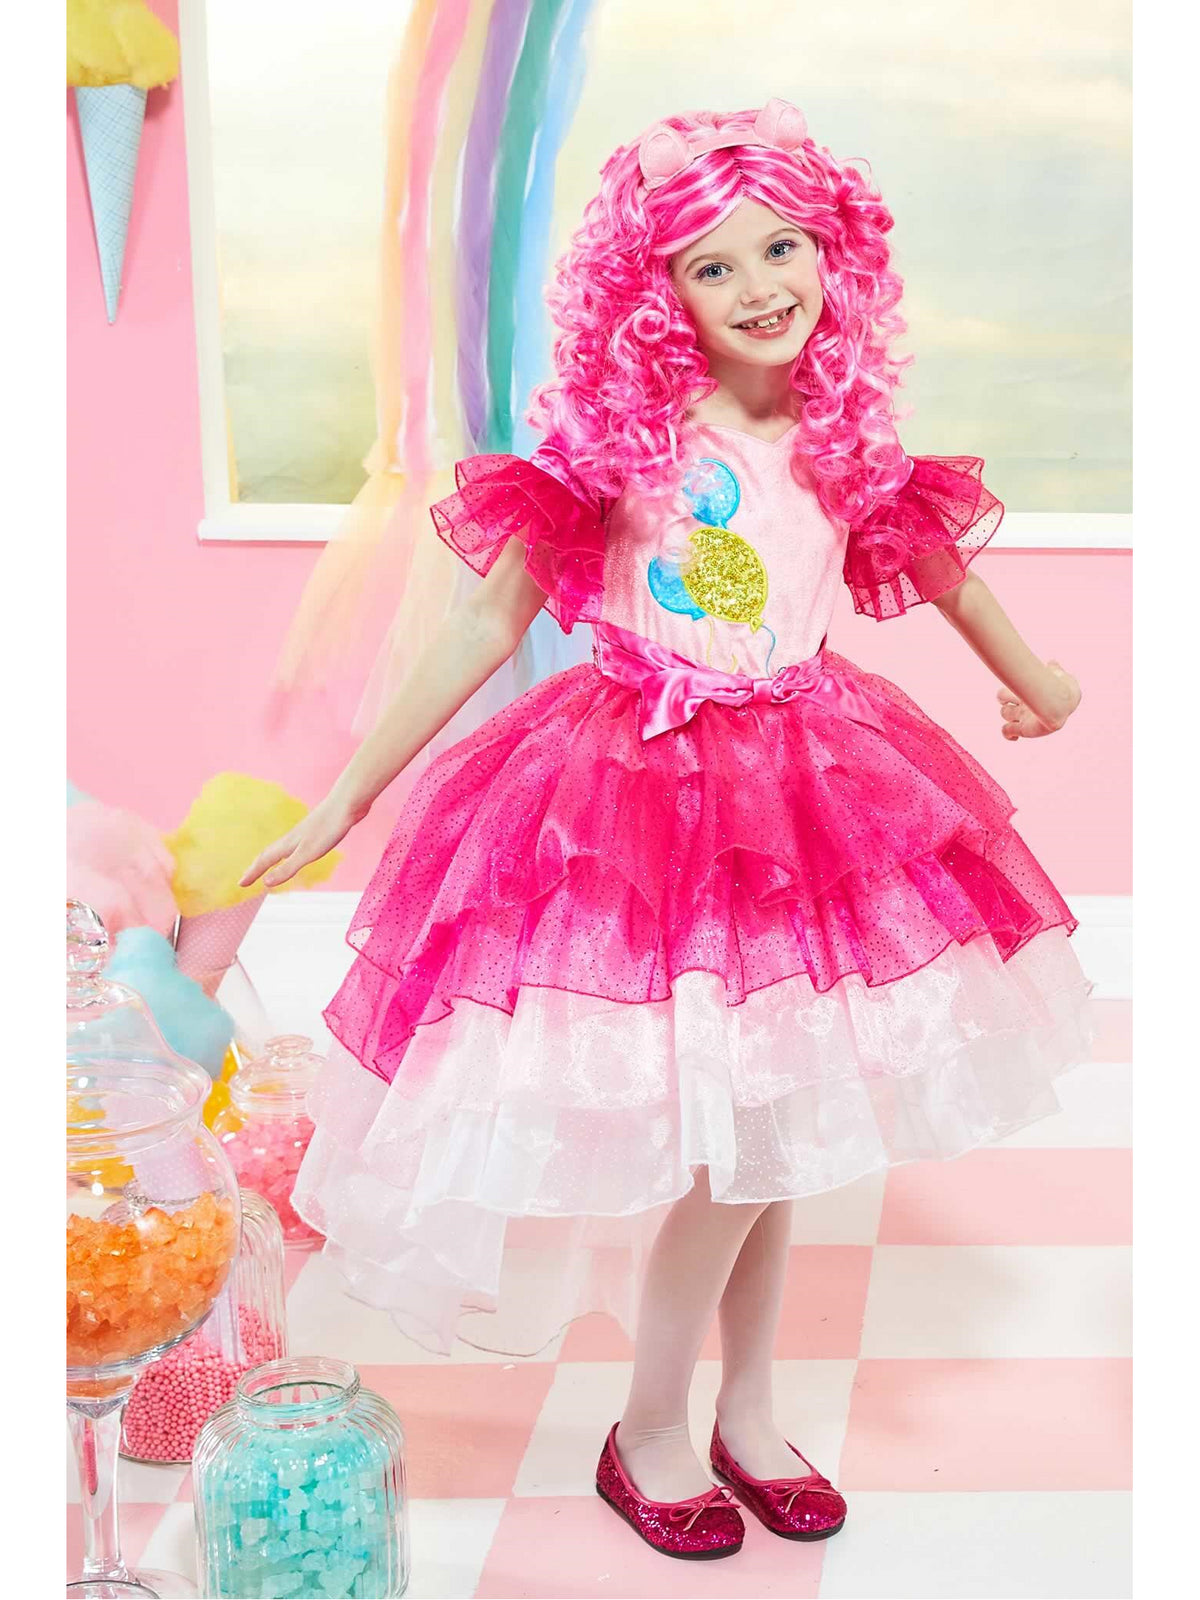 Ultimate My Little Pony Pinkie Pie Costume for Girls - Chasing Fireflies